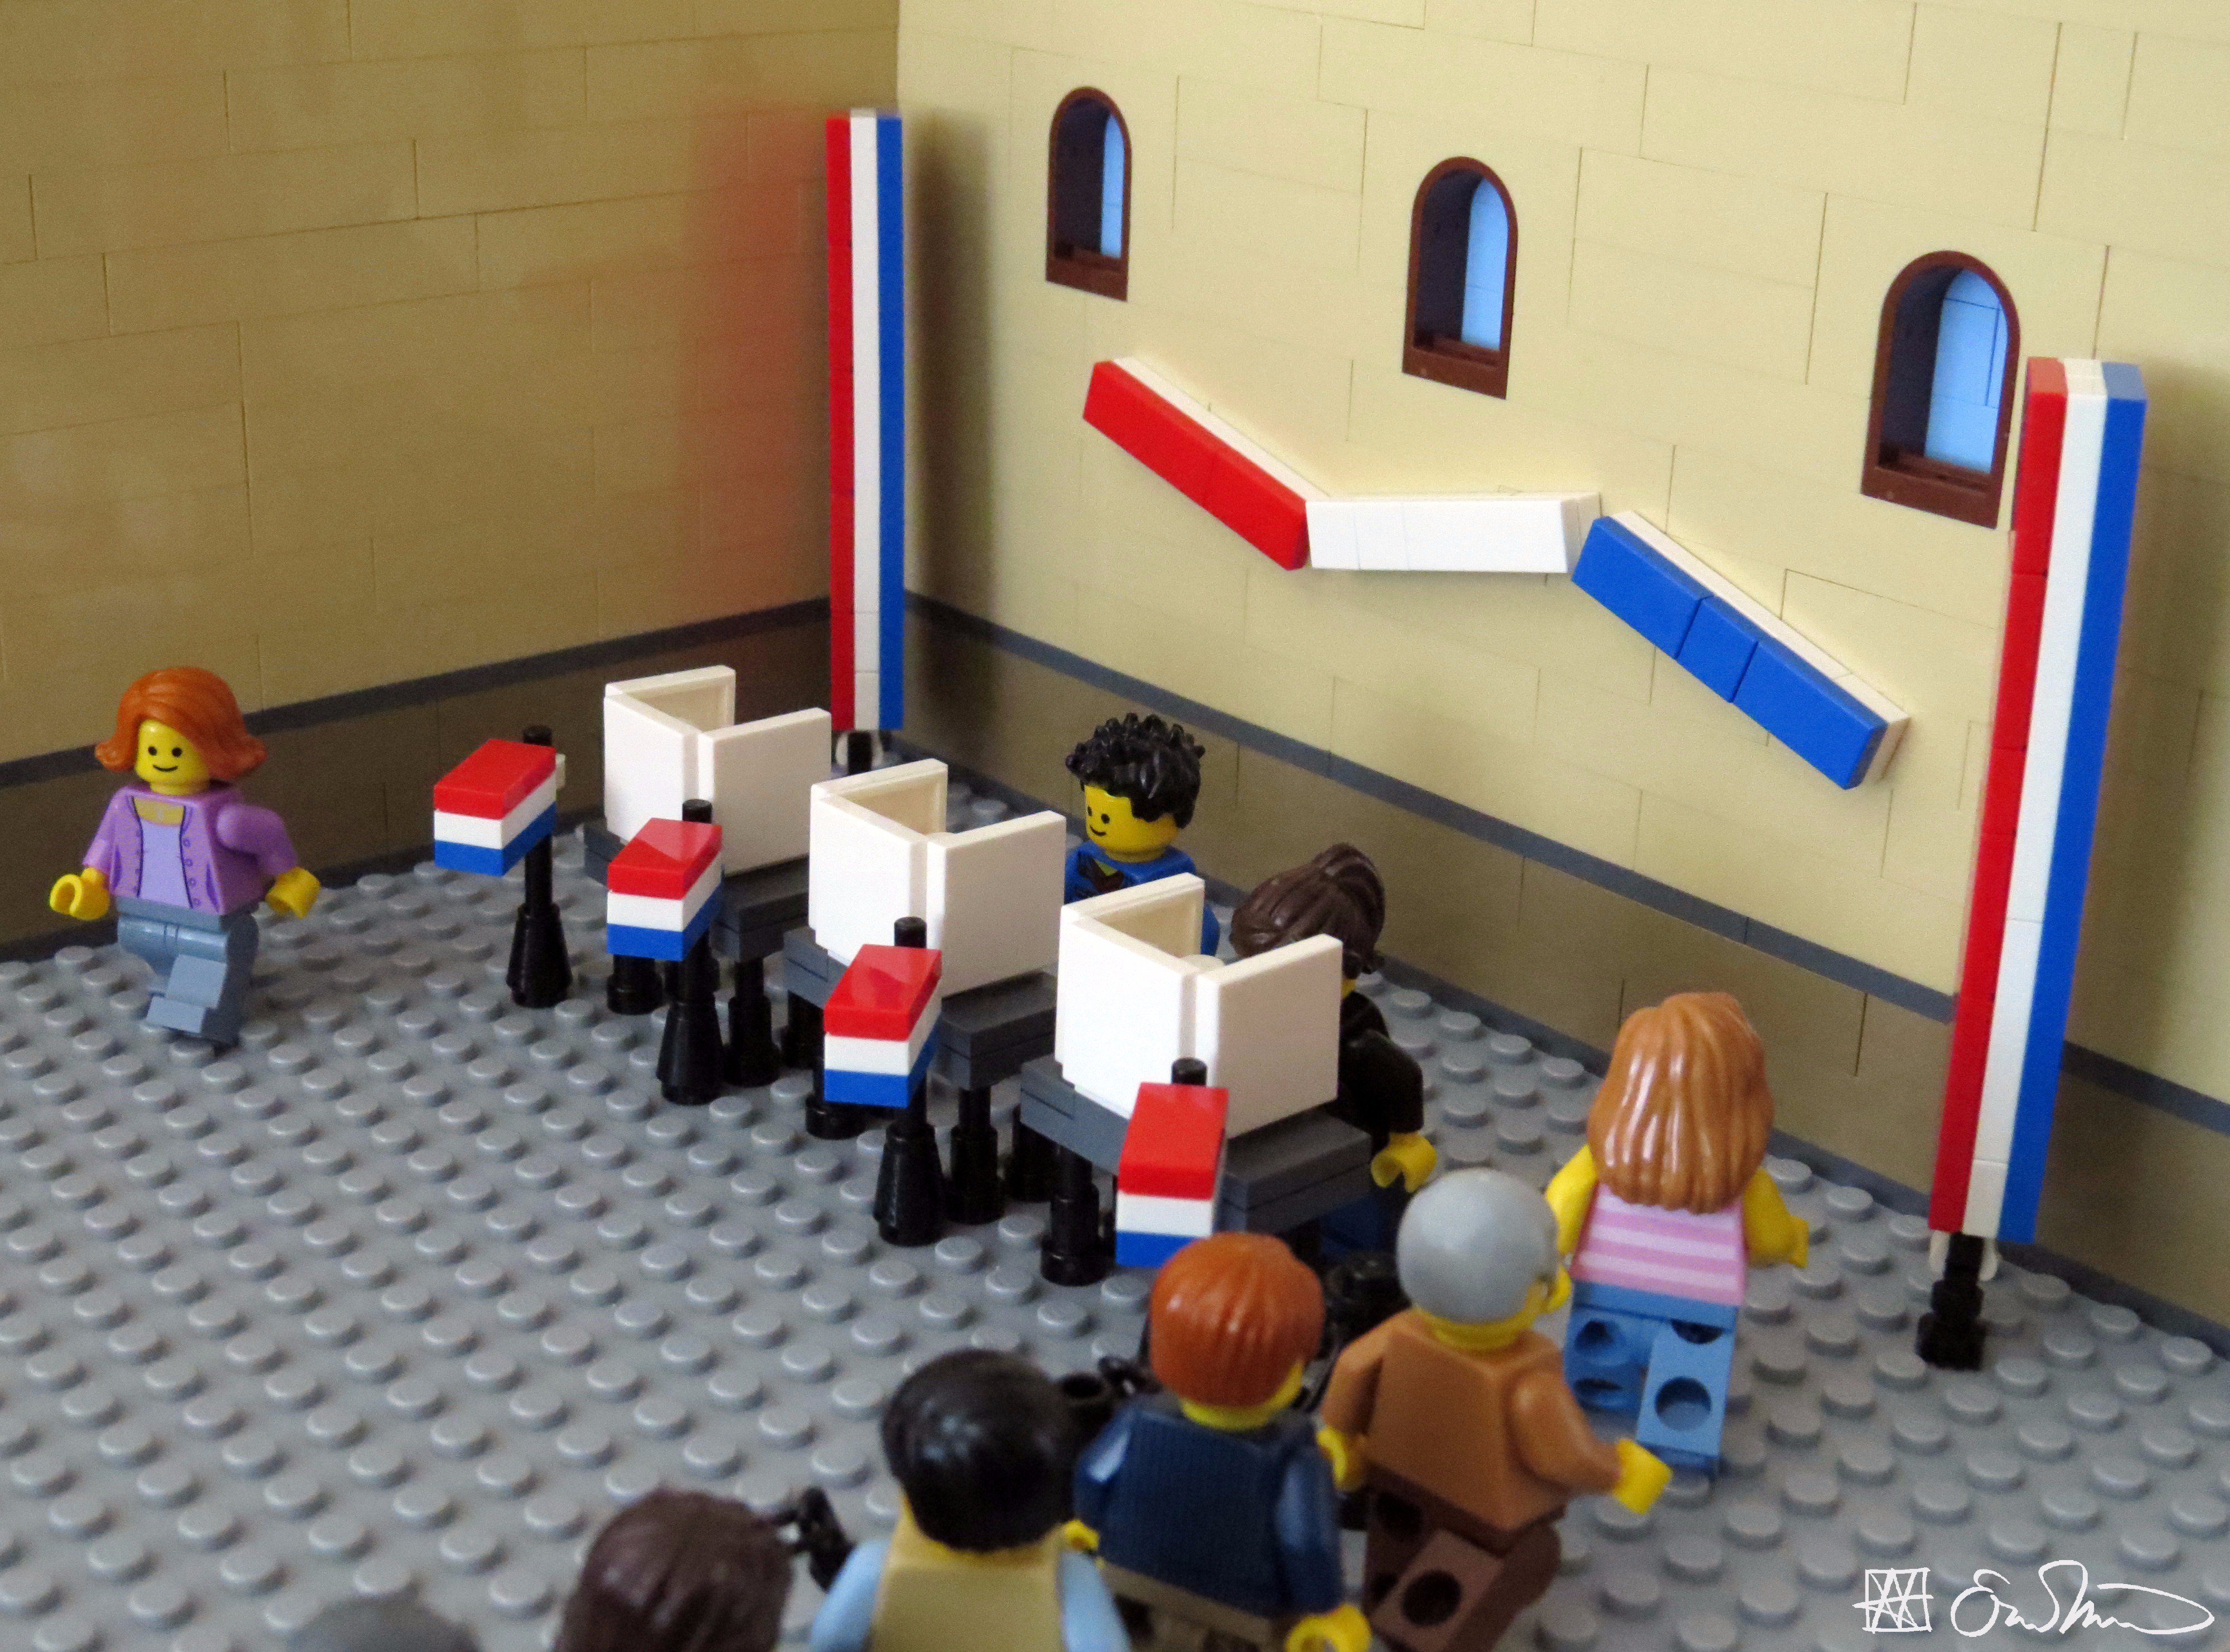 Lego Grad Student on Twitter: "Voting on Election Day, the grad student all  too easily makes a larger impact on society than his research ever will. # vote #Election2016 https://t.co/UOSCk5DTYt" / Twitter